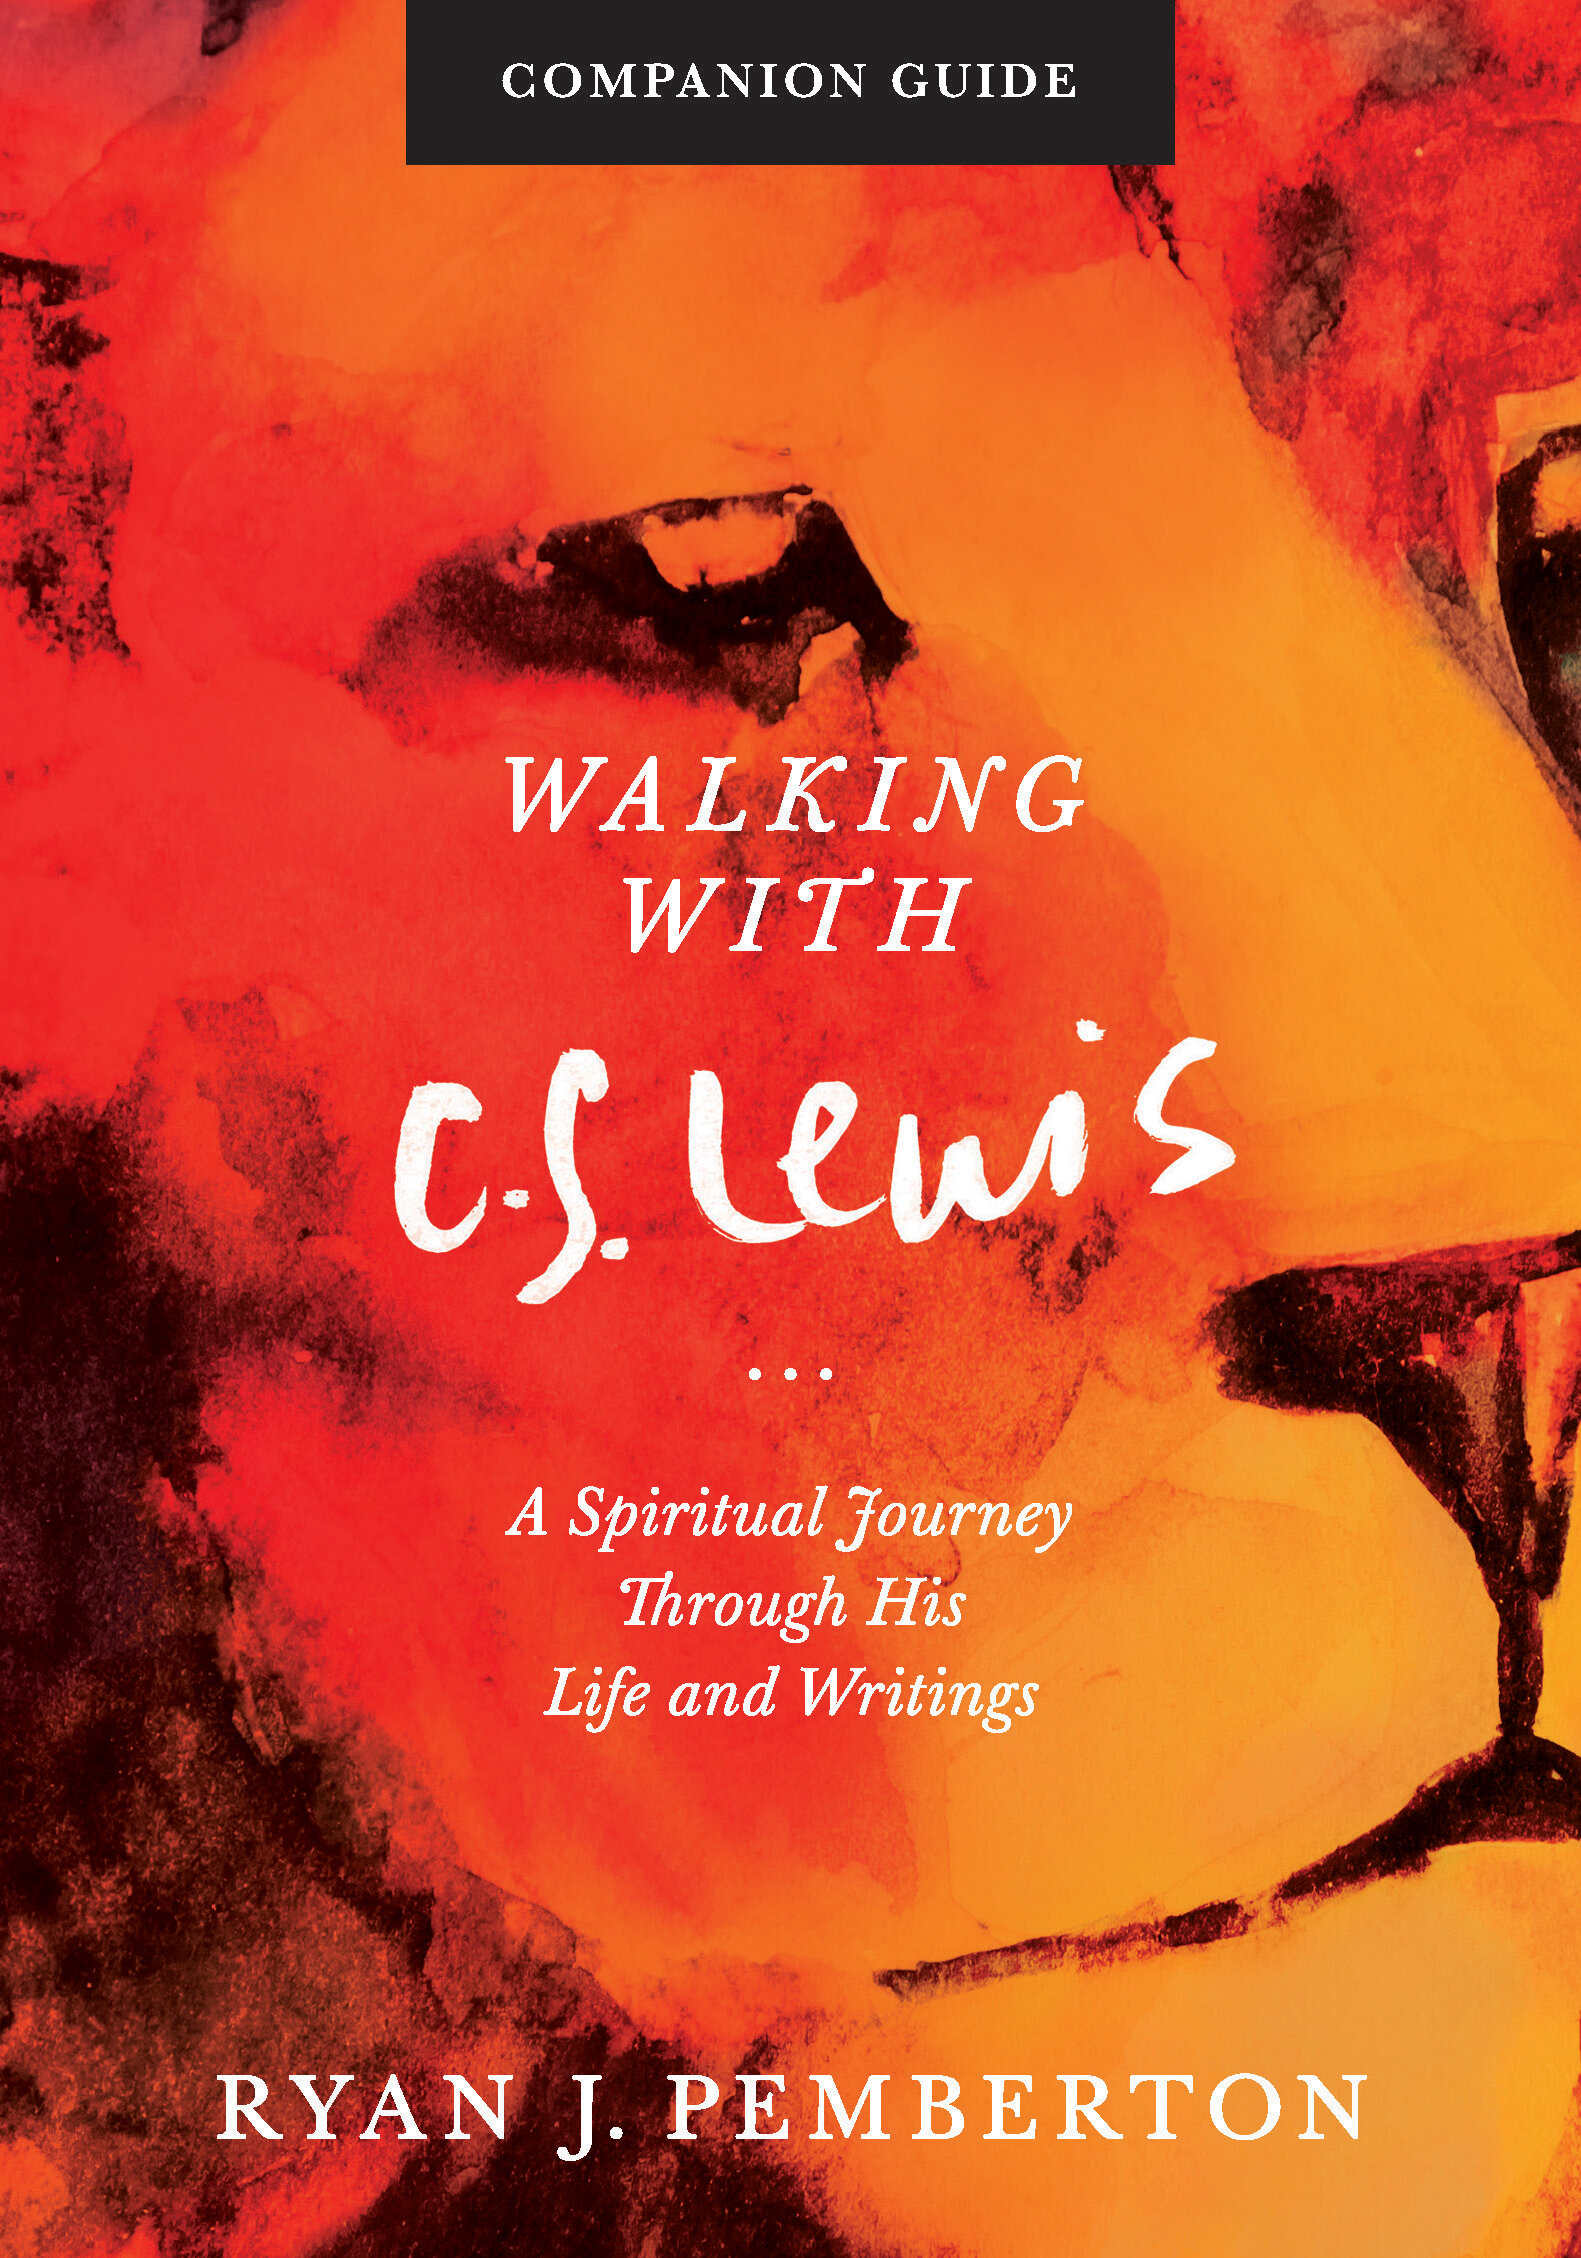 Walking with C. S. Lewis: A Spiritual Journey through His Life and Writings (A Companion Guide)